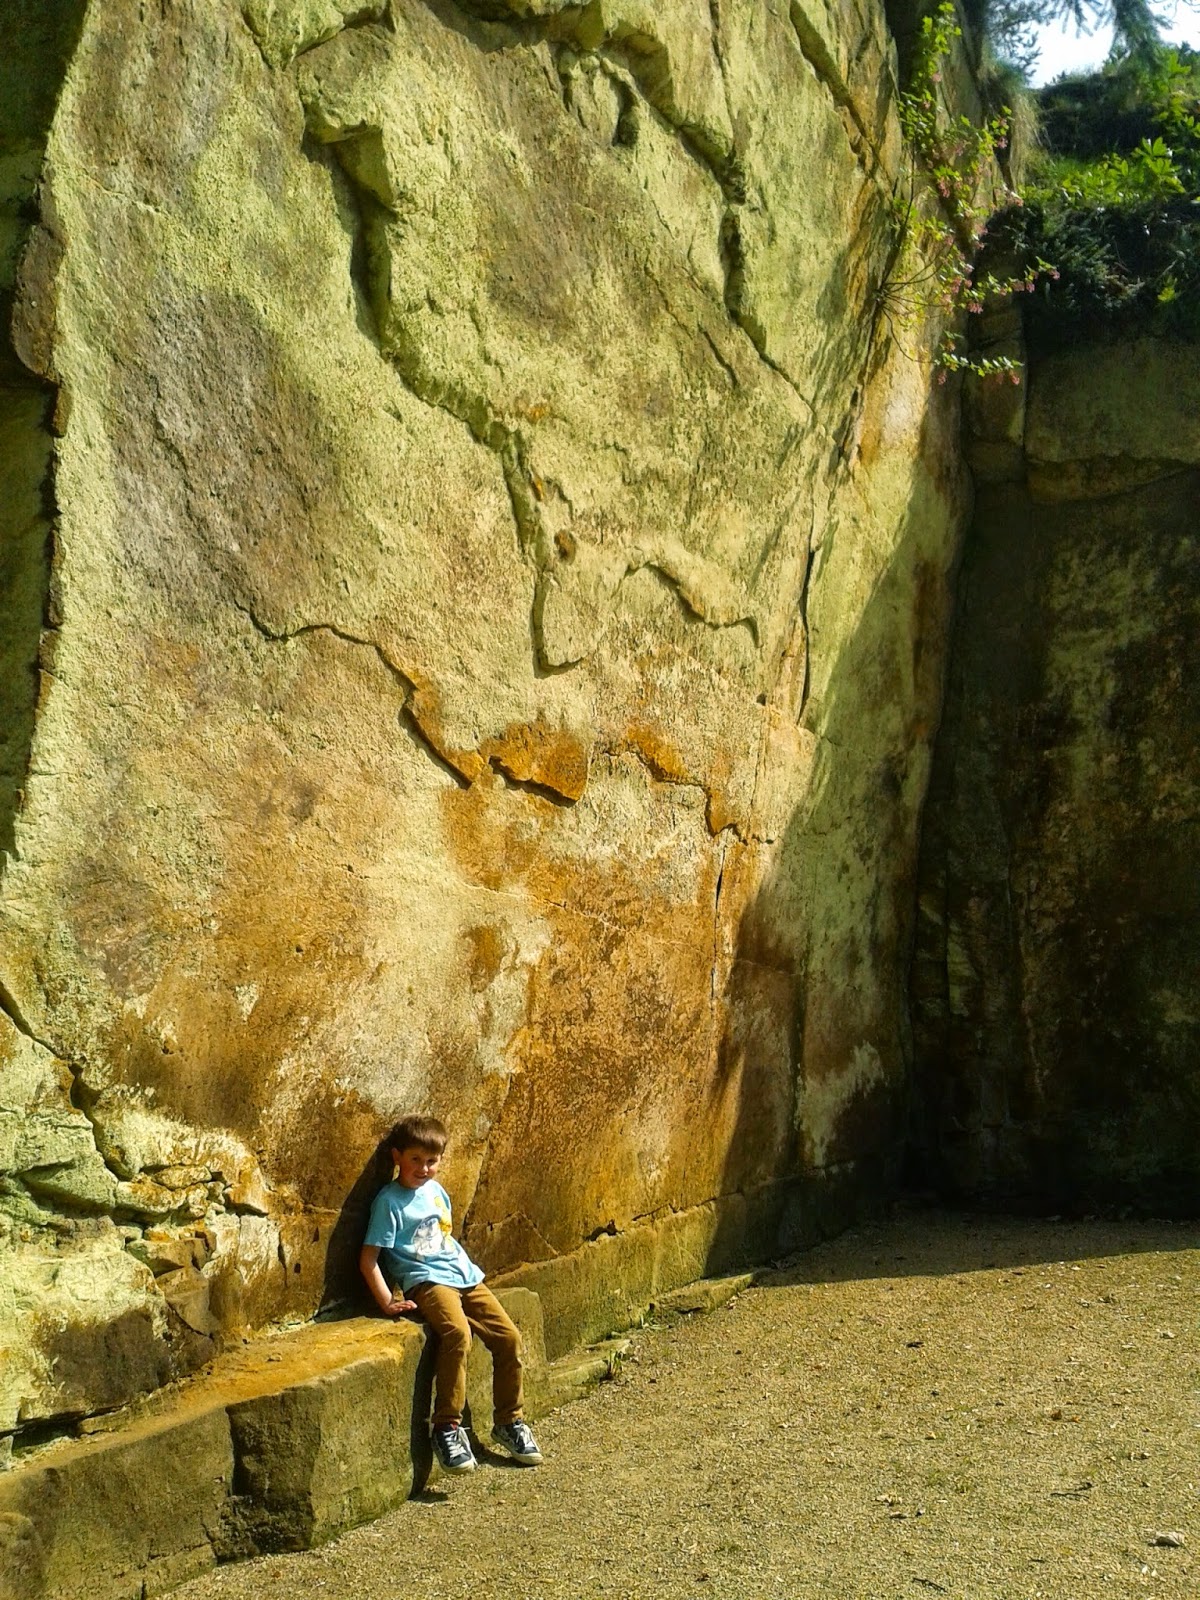 Belsay Hall, Castle and Gardens, Northumberland. Lucas relaxing in the Quarry Garden.